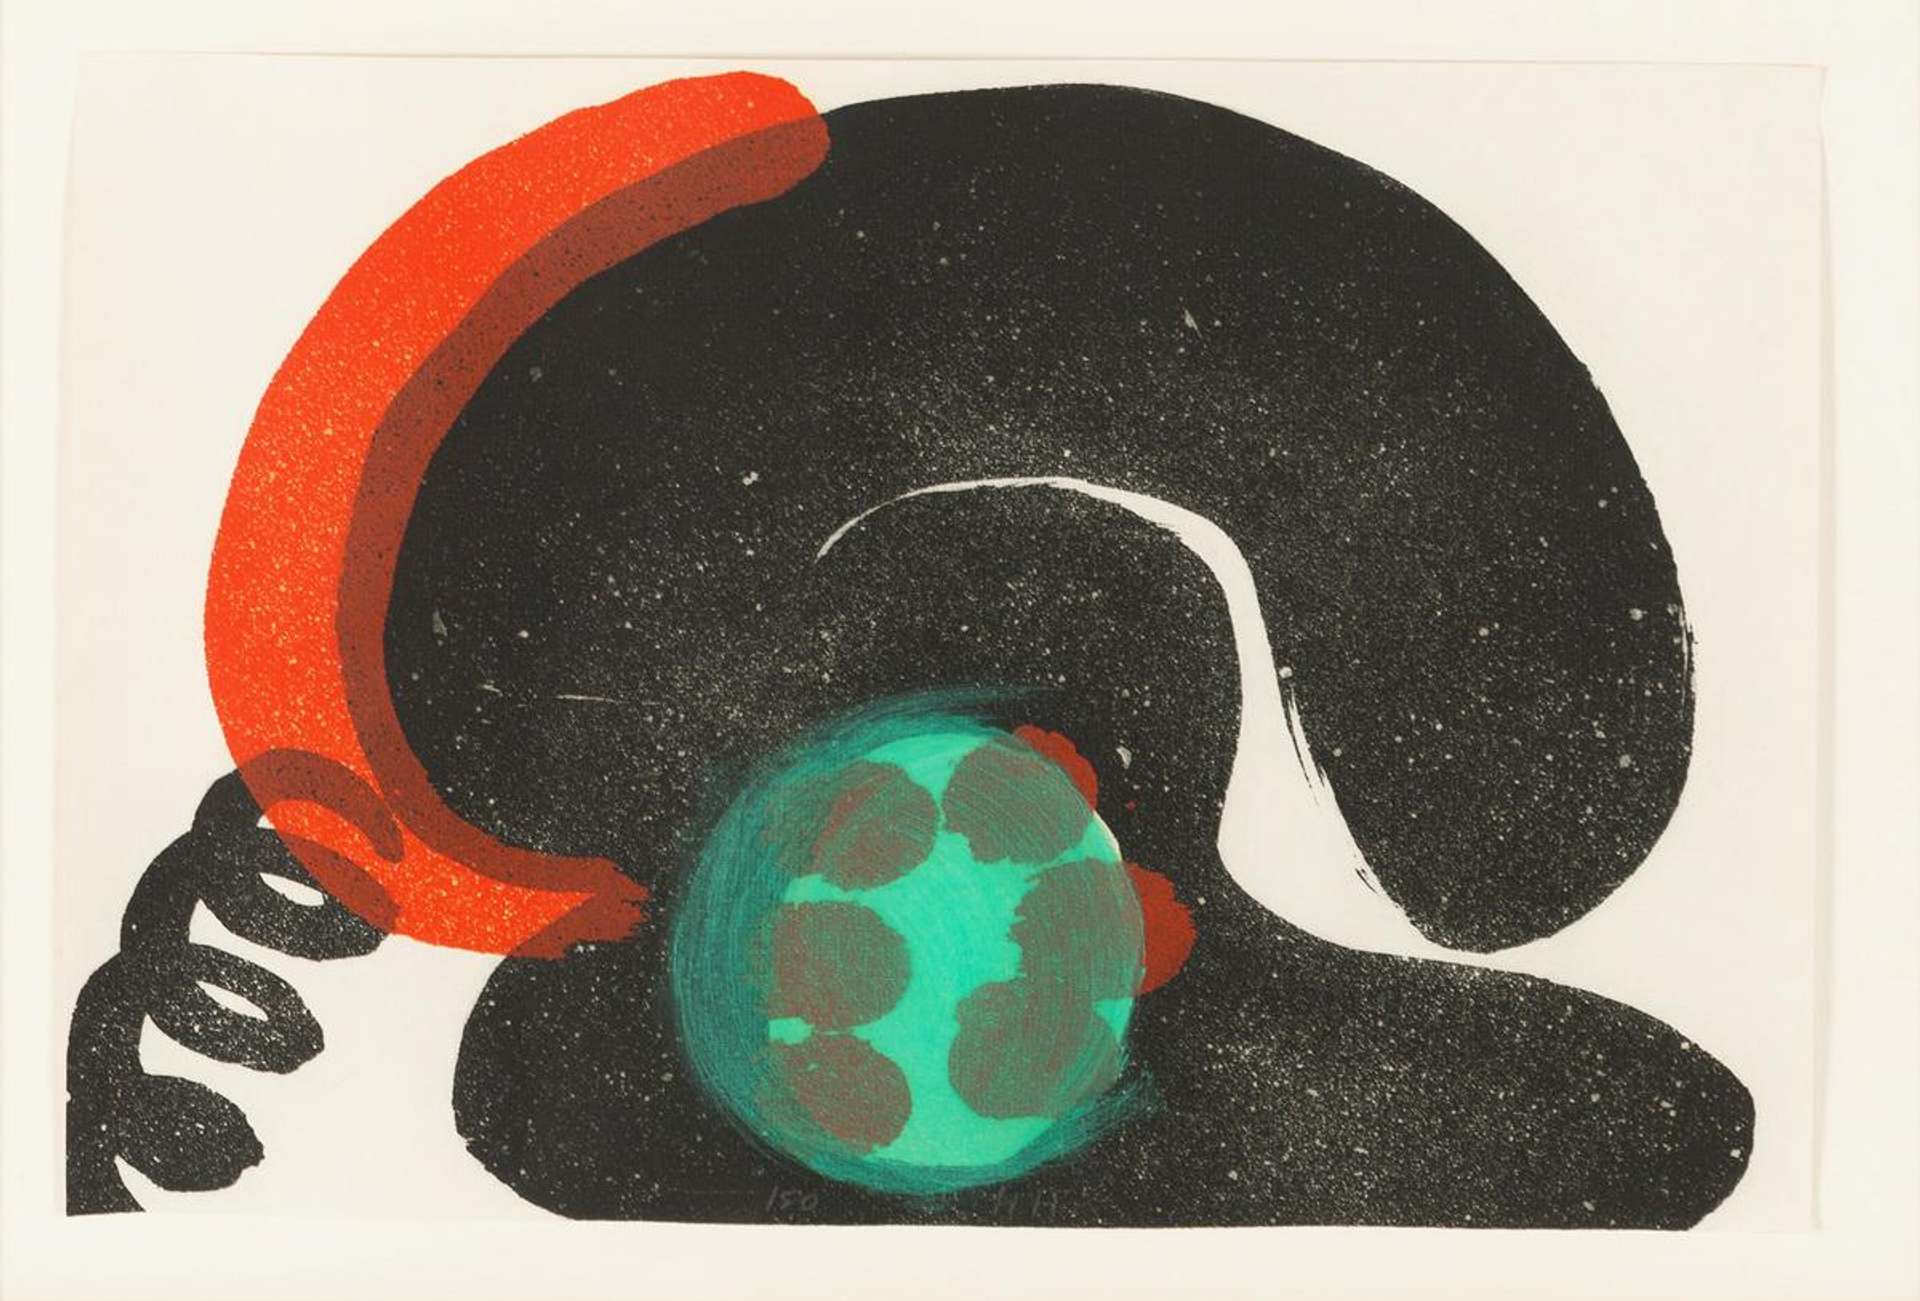 Howard Hodgkin: In Touch, Checking In - Signed Print